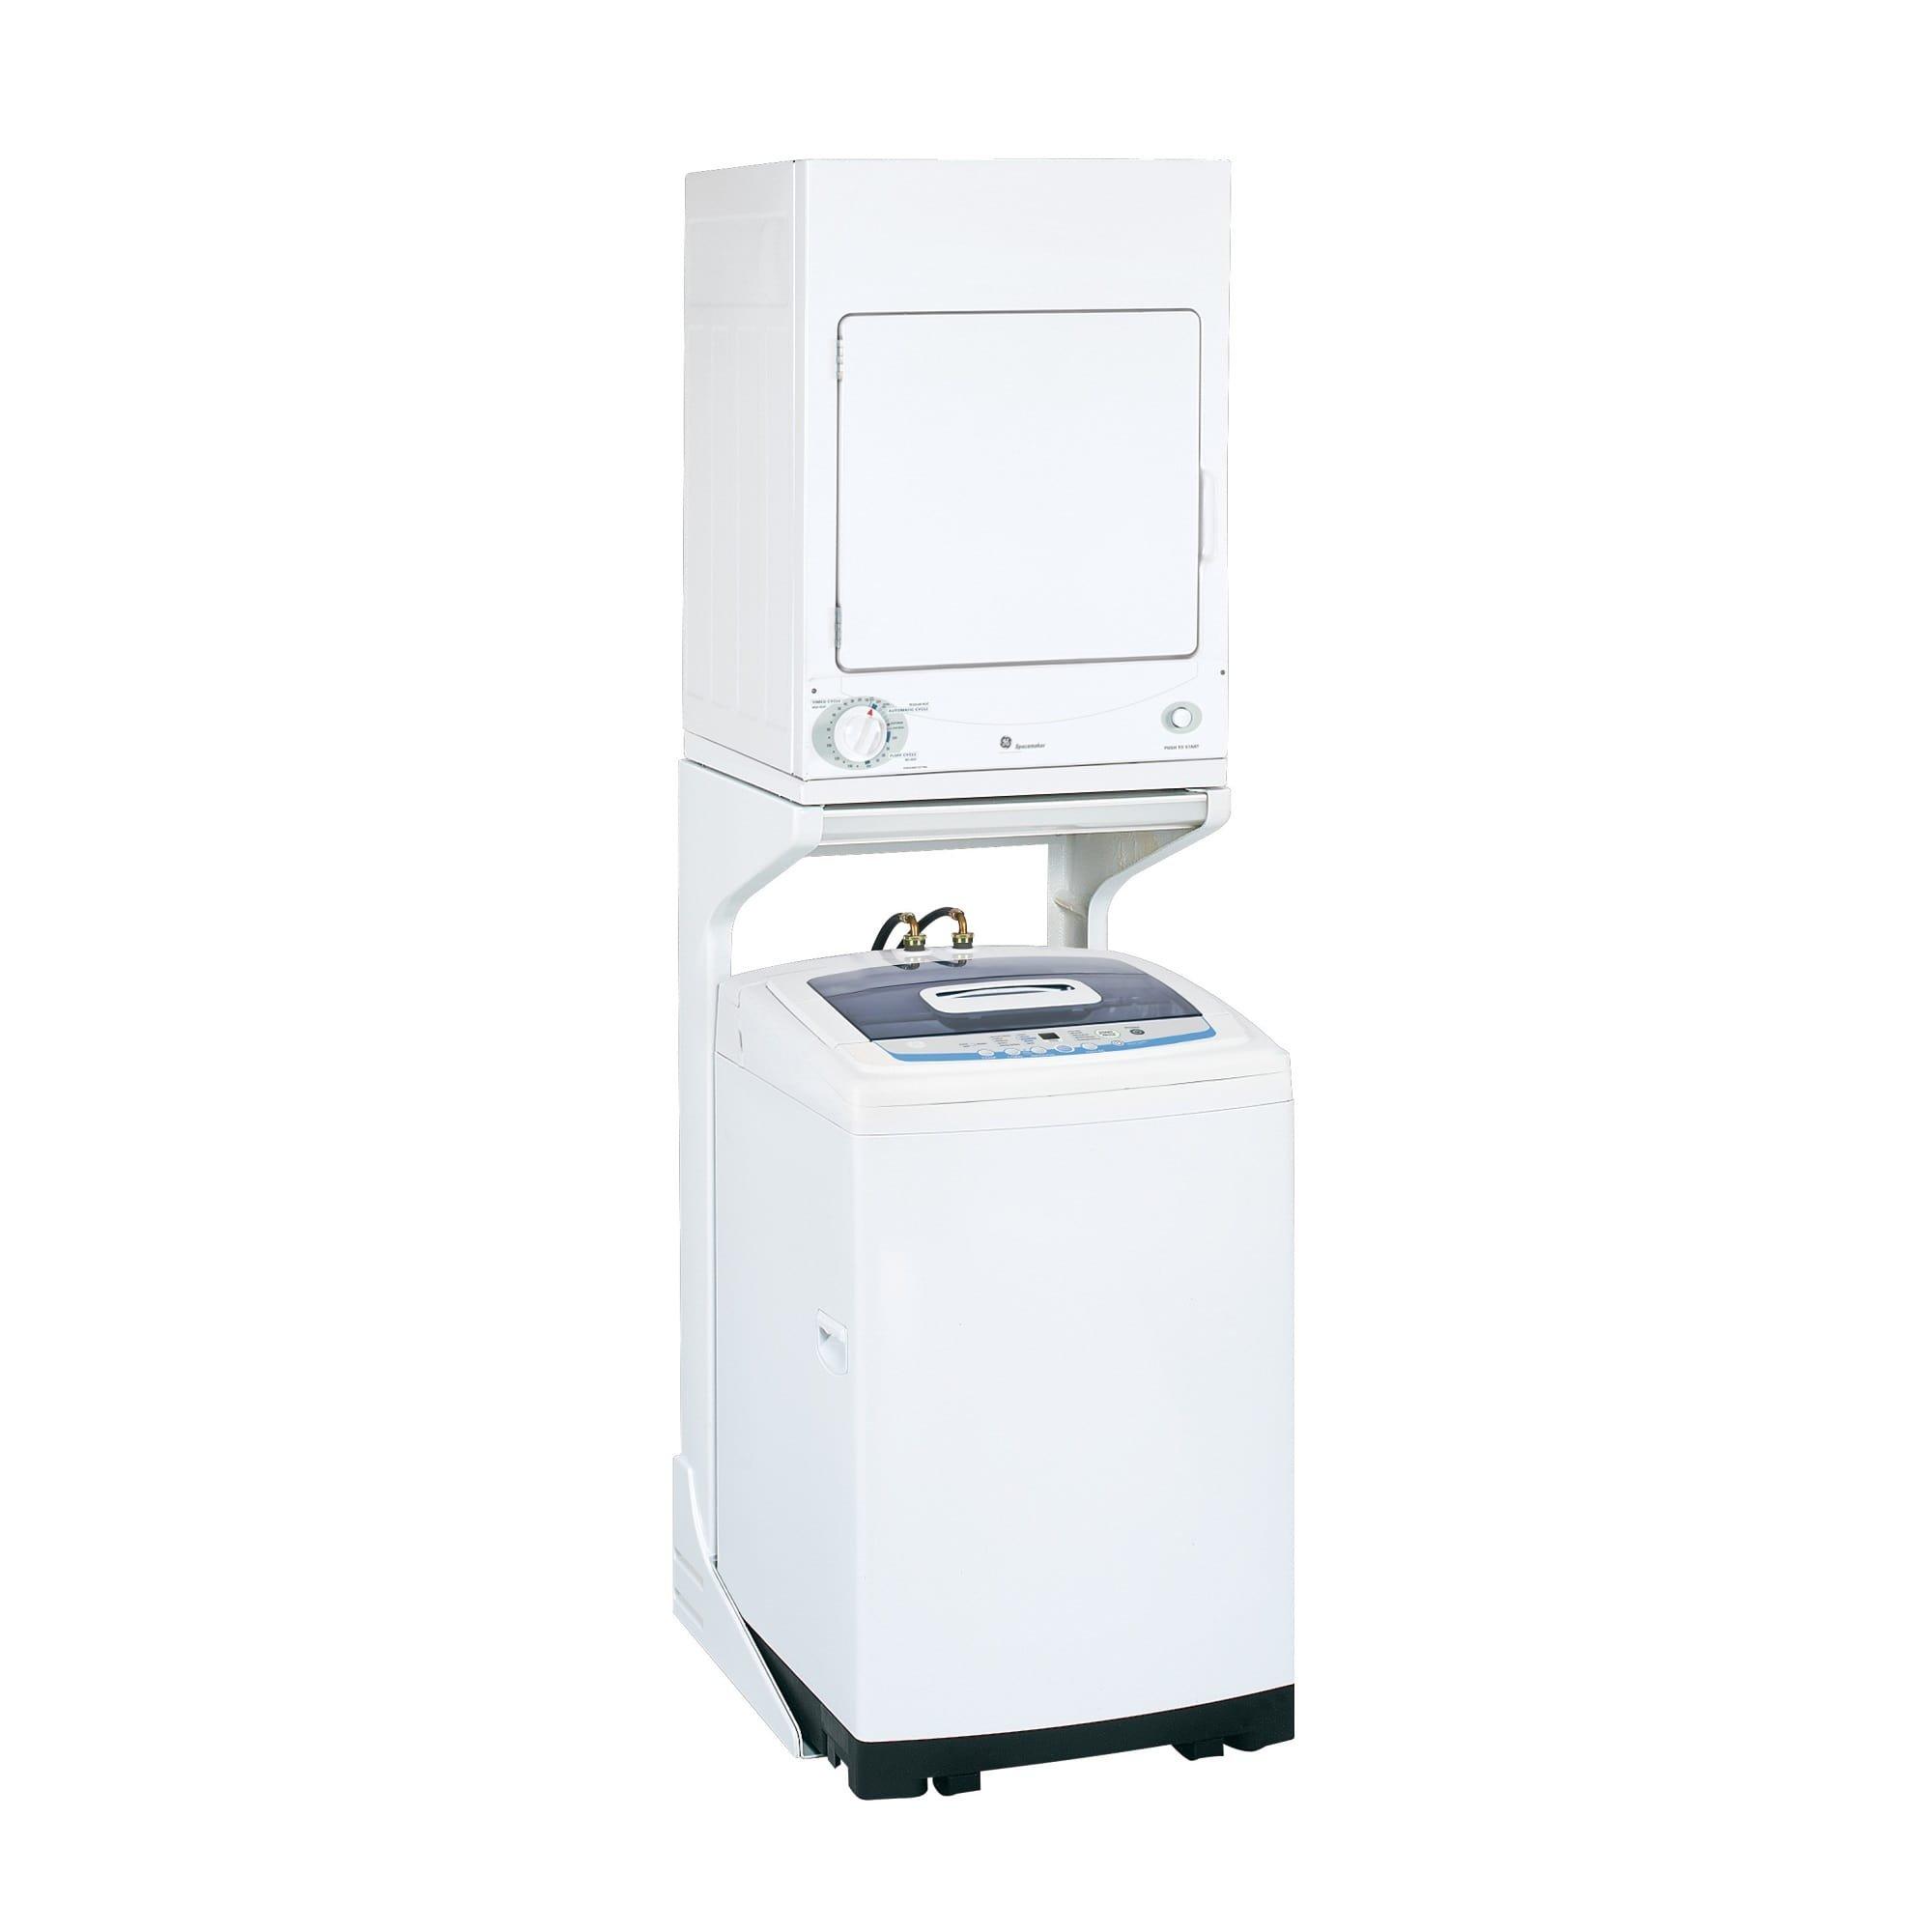 NTC3500FW in White by Amana in Kinder, LA - 1.5 cu. ft. Compact